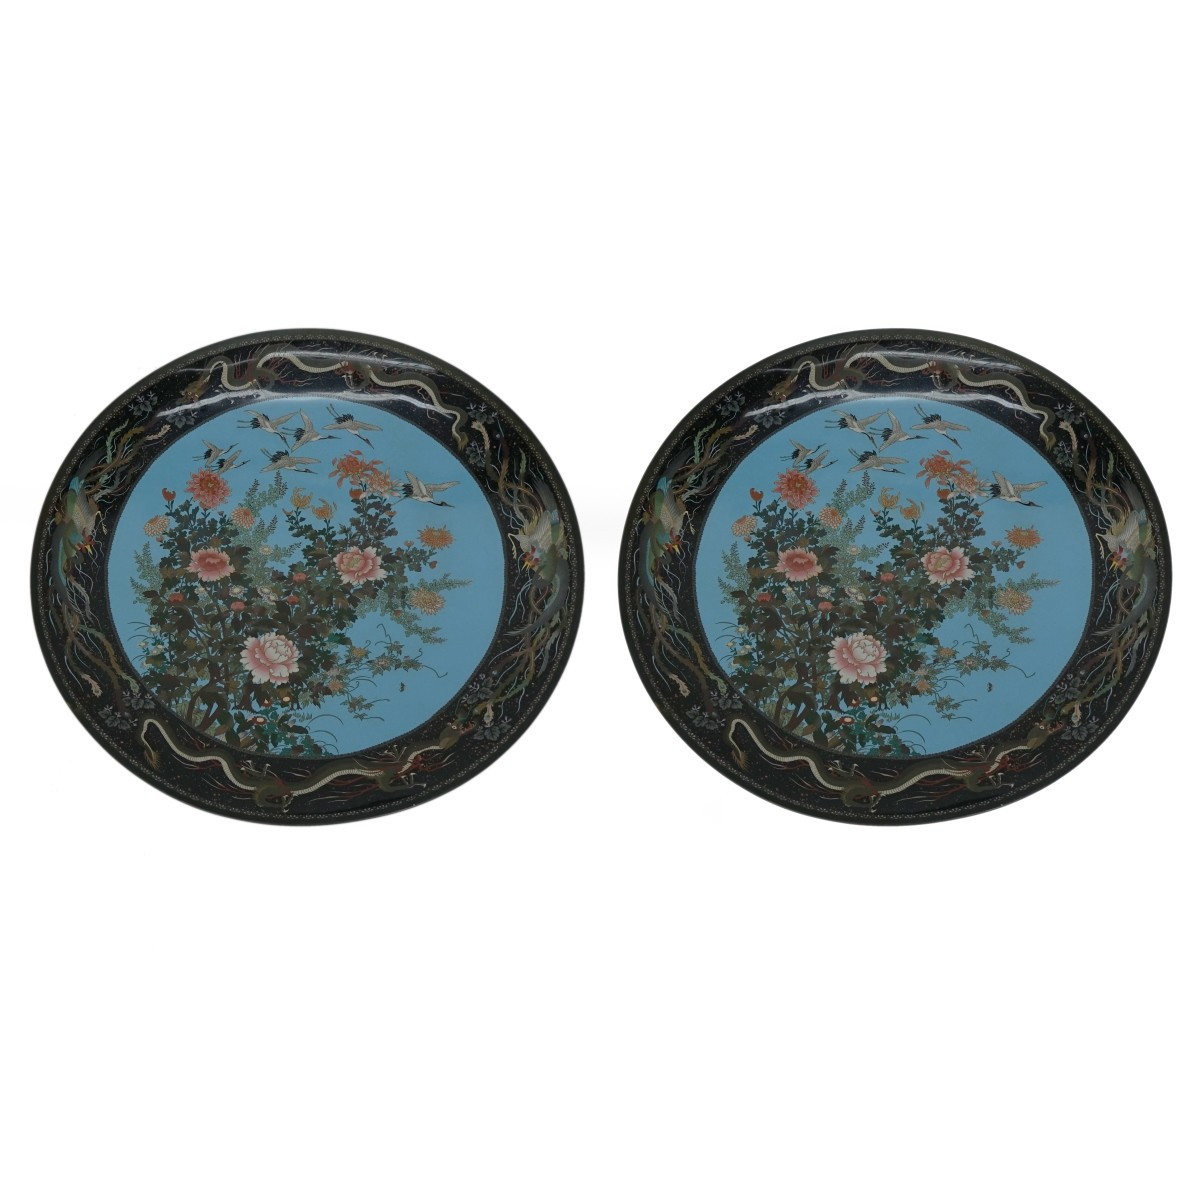 Monumental Pair of Japanese Cloisonne Chargers